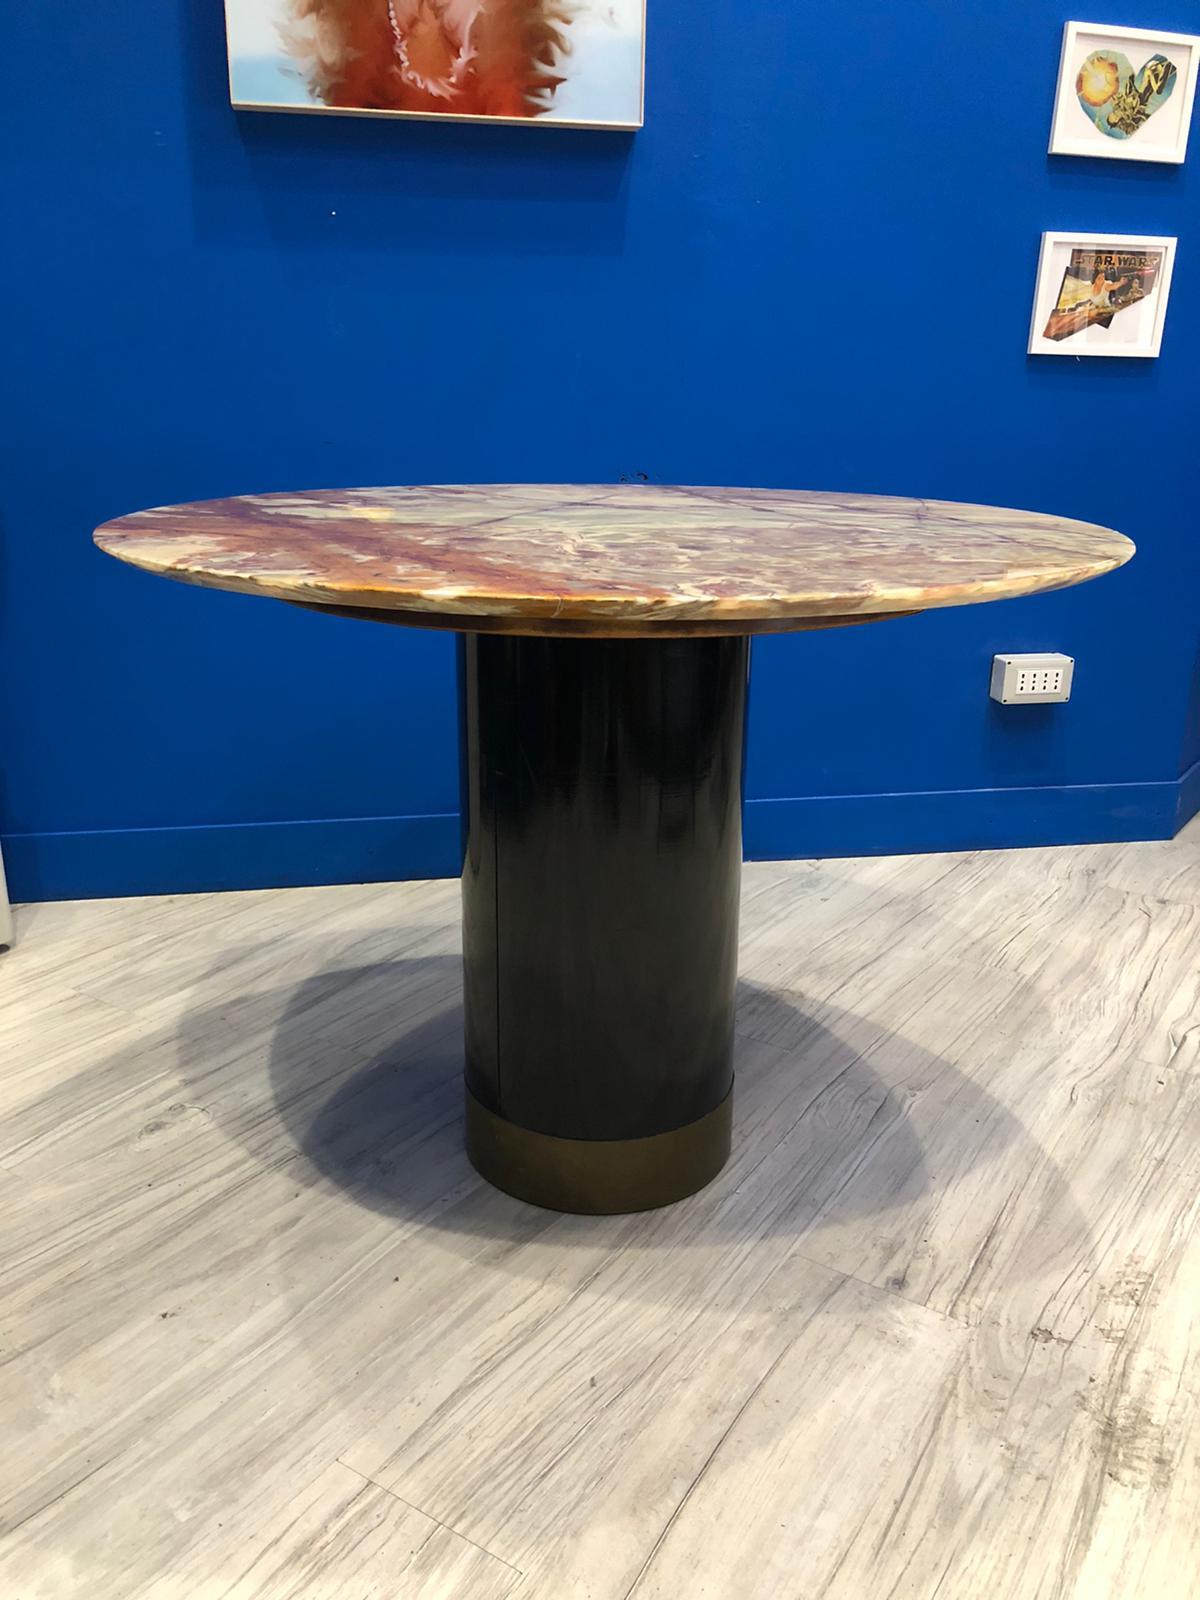 Mid-20th Century Italian Round Table 1950s Onyx Marble Top Wiith Black Wooden Base and Brass Band